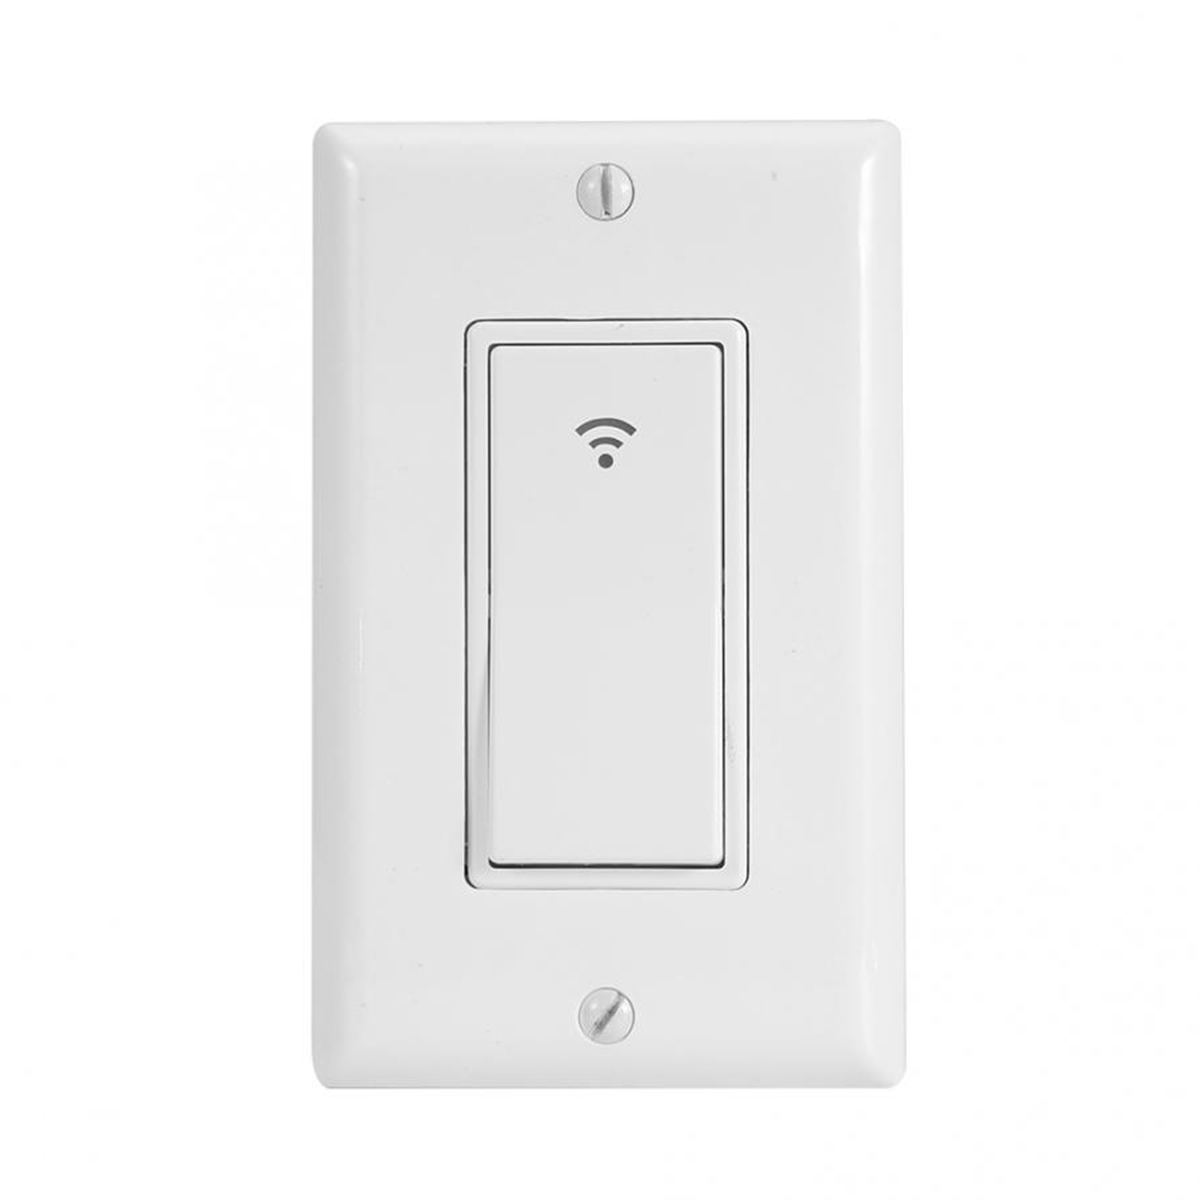 WiFi-Smart-Wall-Light-Wireless-Touch-Panel-Switch-App-Timing-for-Alexa-Google-Home-Remote-Control-1617891-7